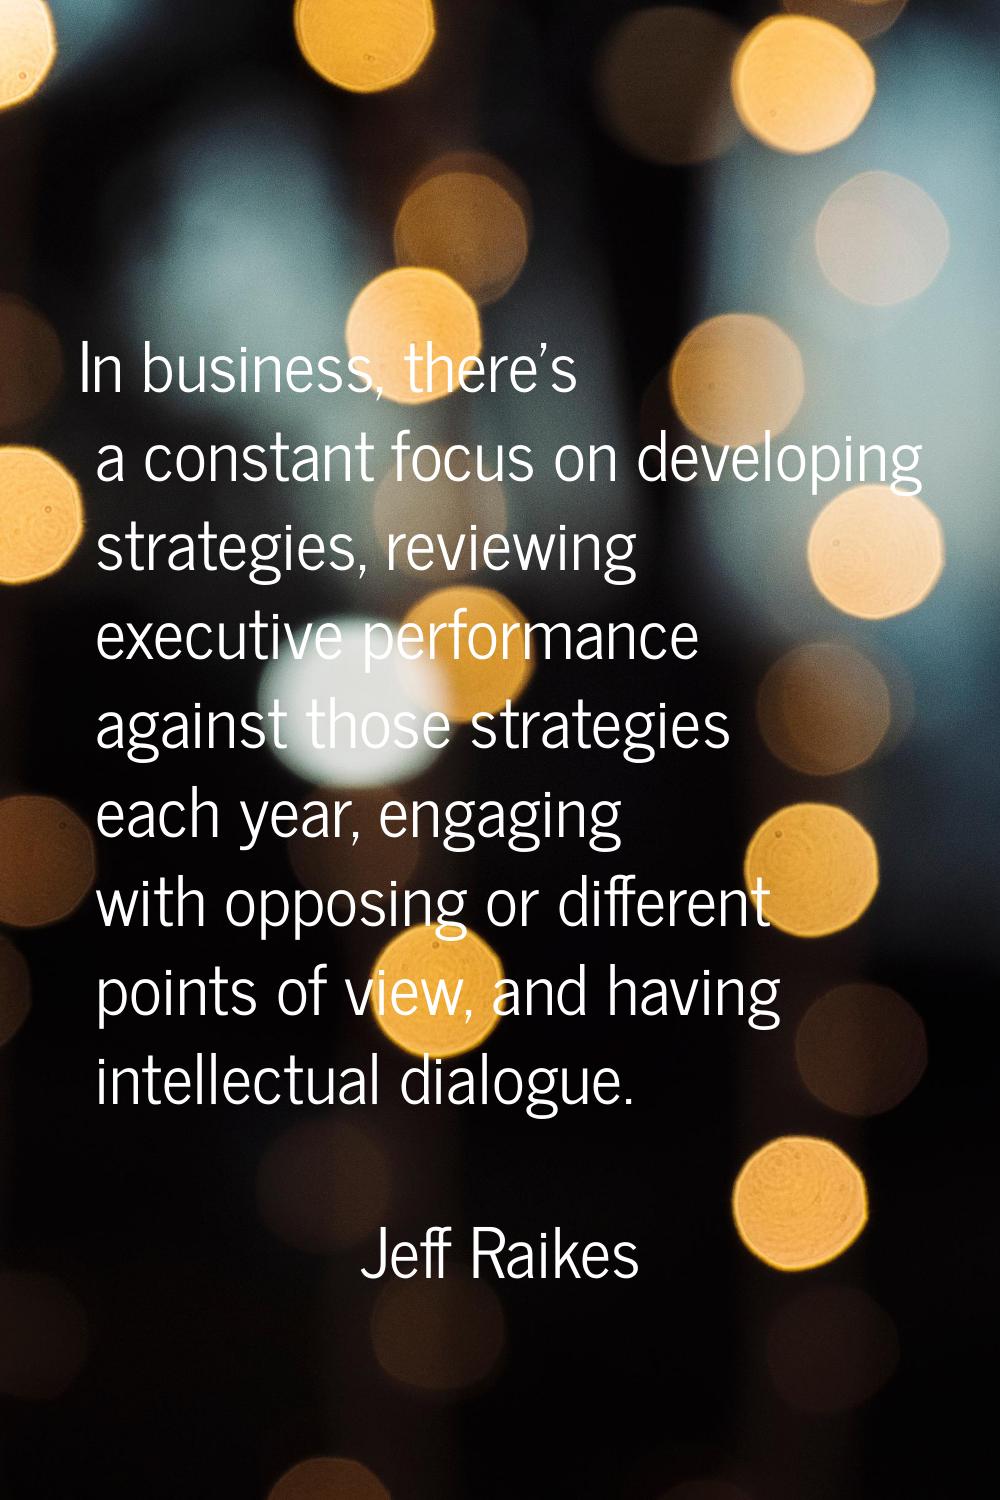 In business, there's a constant focus on developing strategies, reviewing executive performance aga